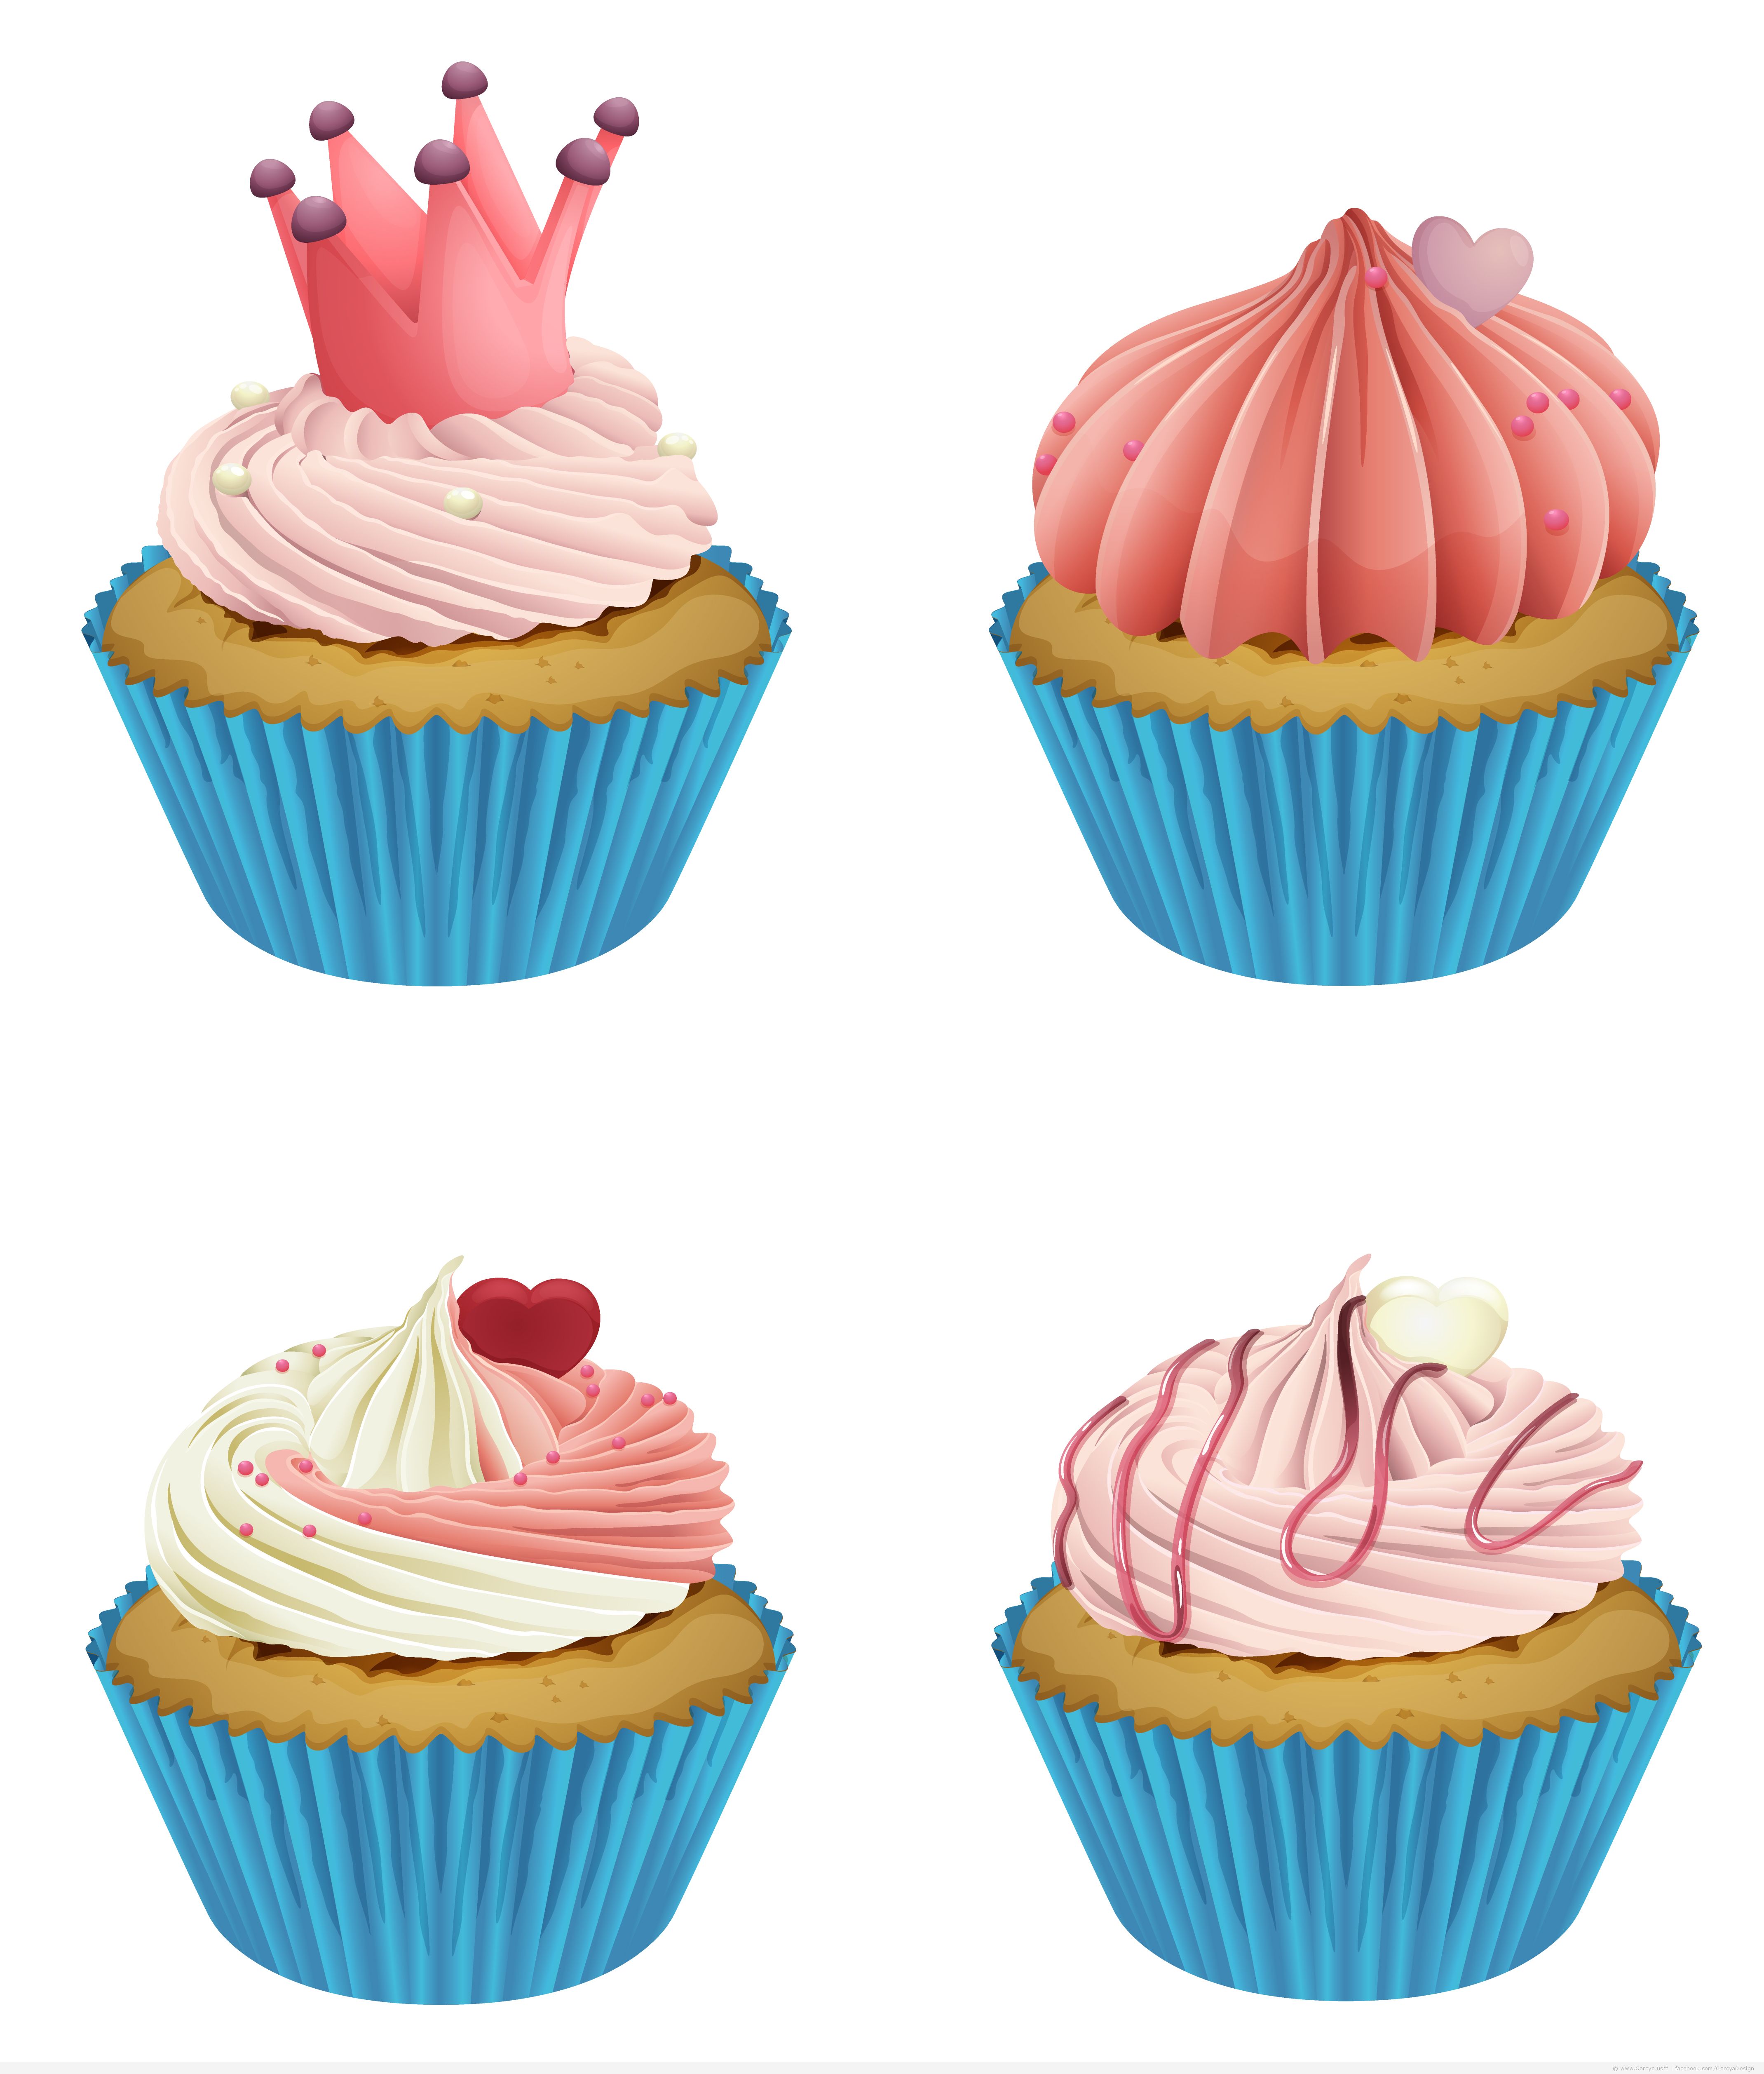 Cakes and Sweets EPS Free Vectors | Colourless Design